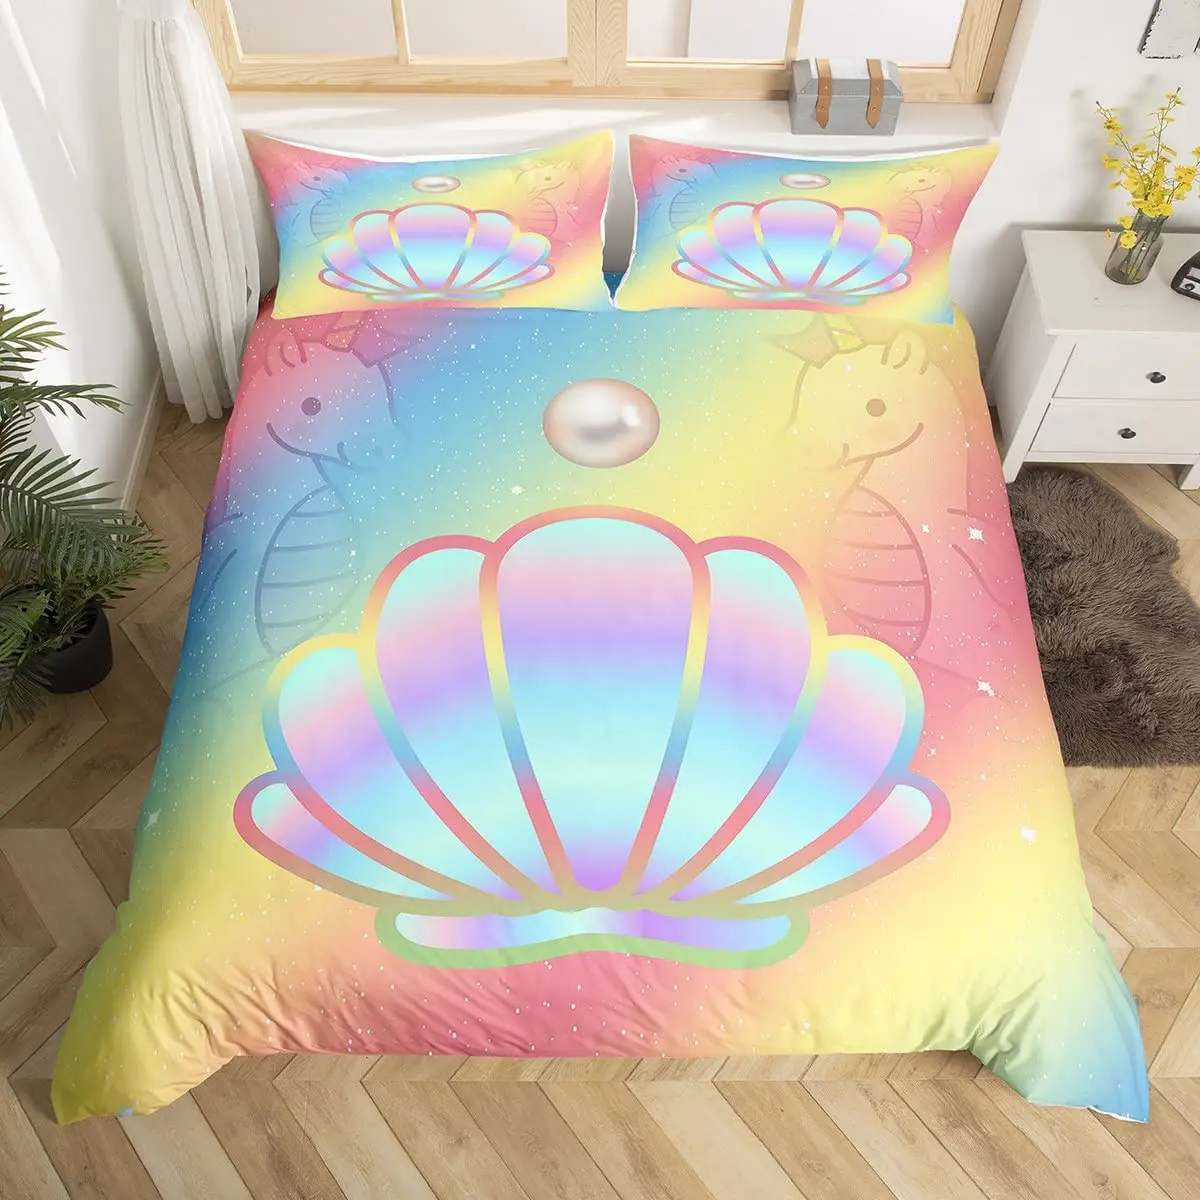 

Rainbow Conch Duvet Cover Set Colorful Rainbow Bedding Set For Kids Girls Microfiber Multicolor Comforter Cover Twin King Size